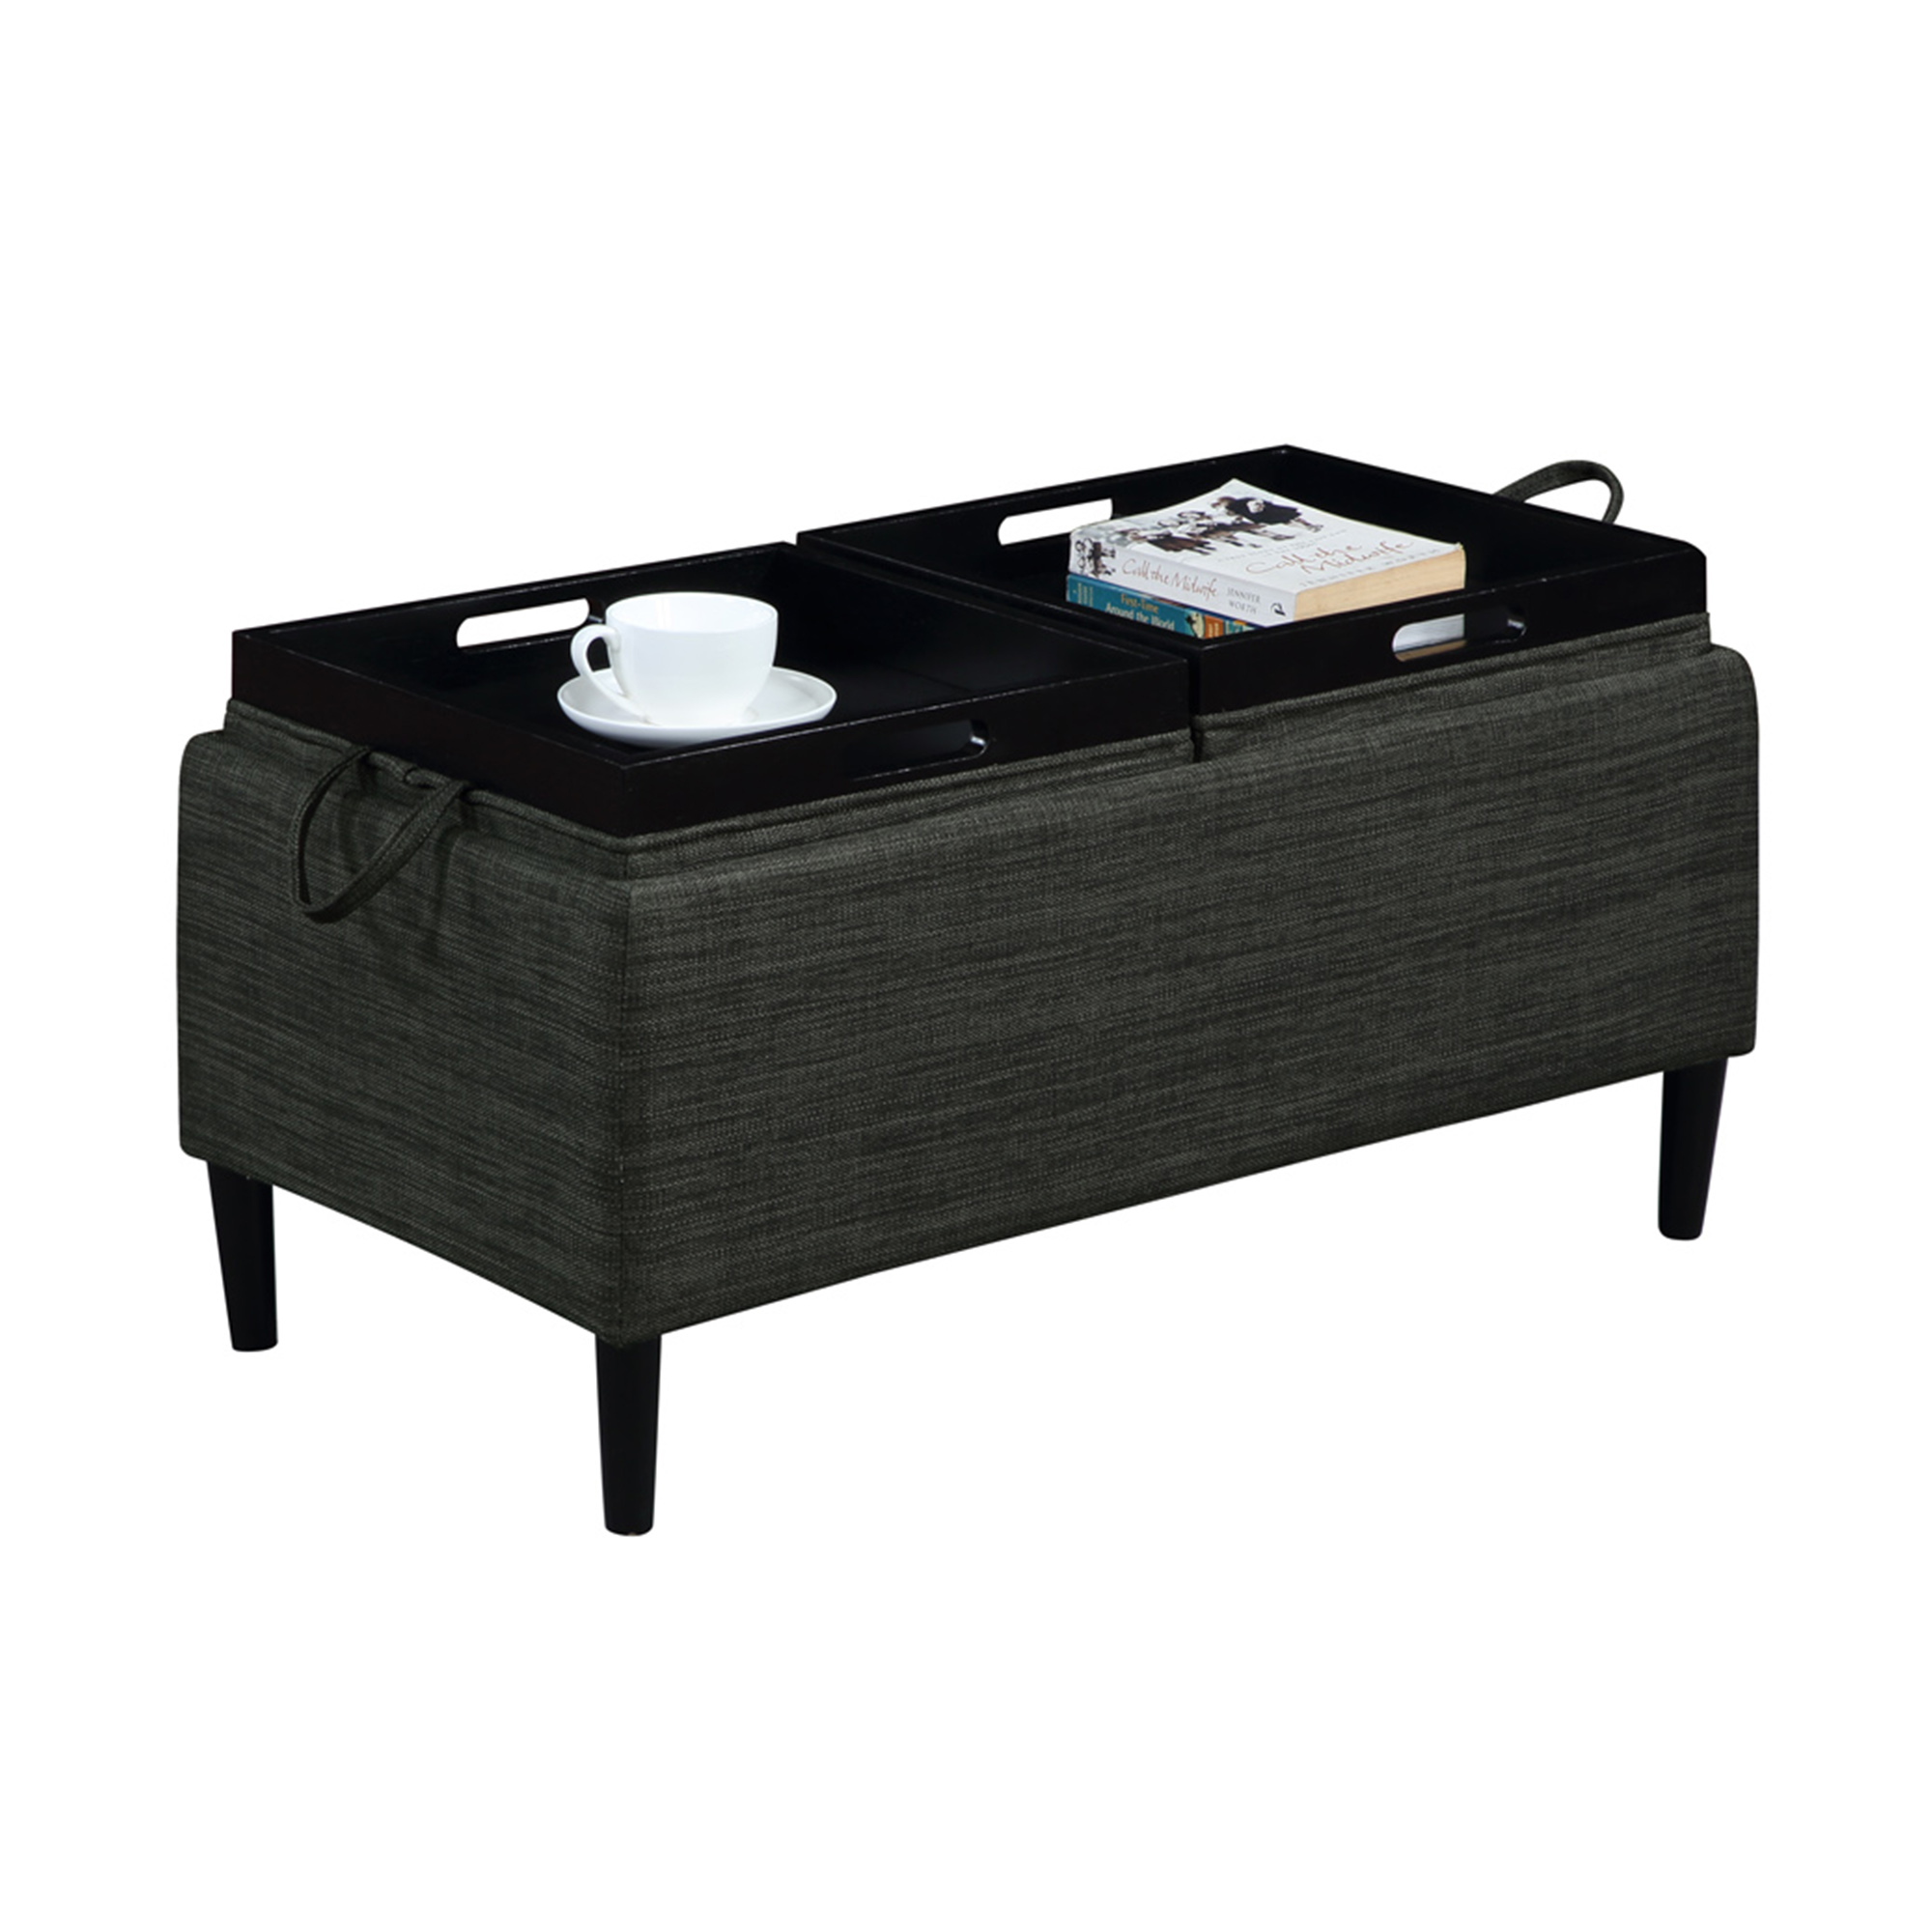 Convenience Concepts Designs4Comfort Magnolia Storage Ottoman with Reversible Trays, Dark Charcoal Gray Fabric - image 5 of 7